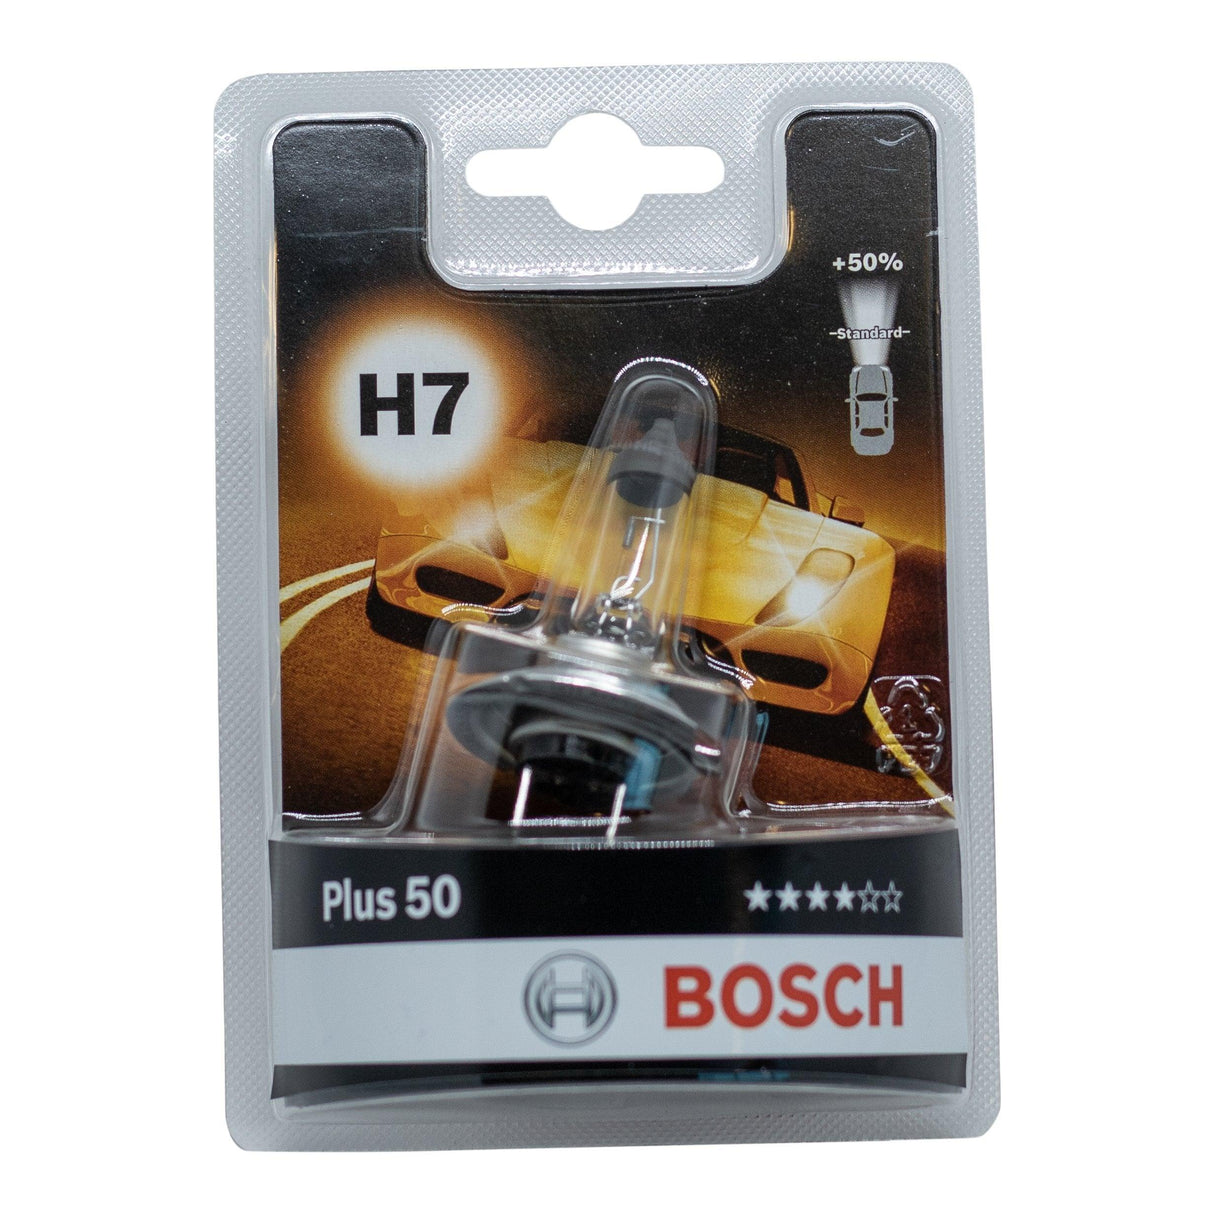 Bosch Plus 50 H7 - Xpert Cleaning